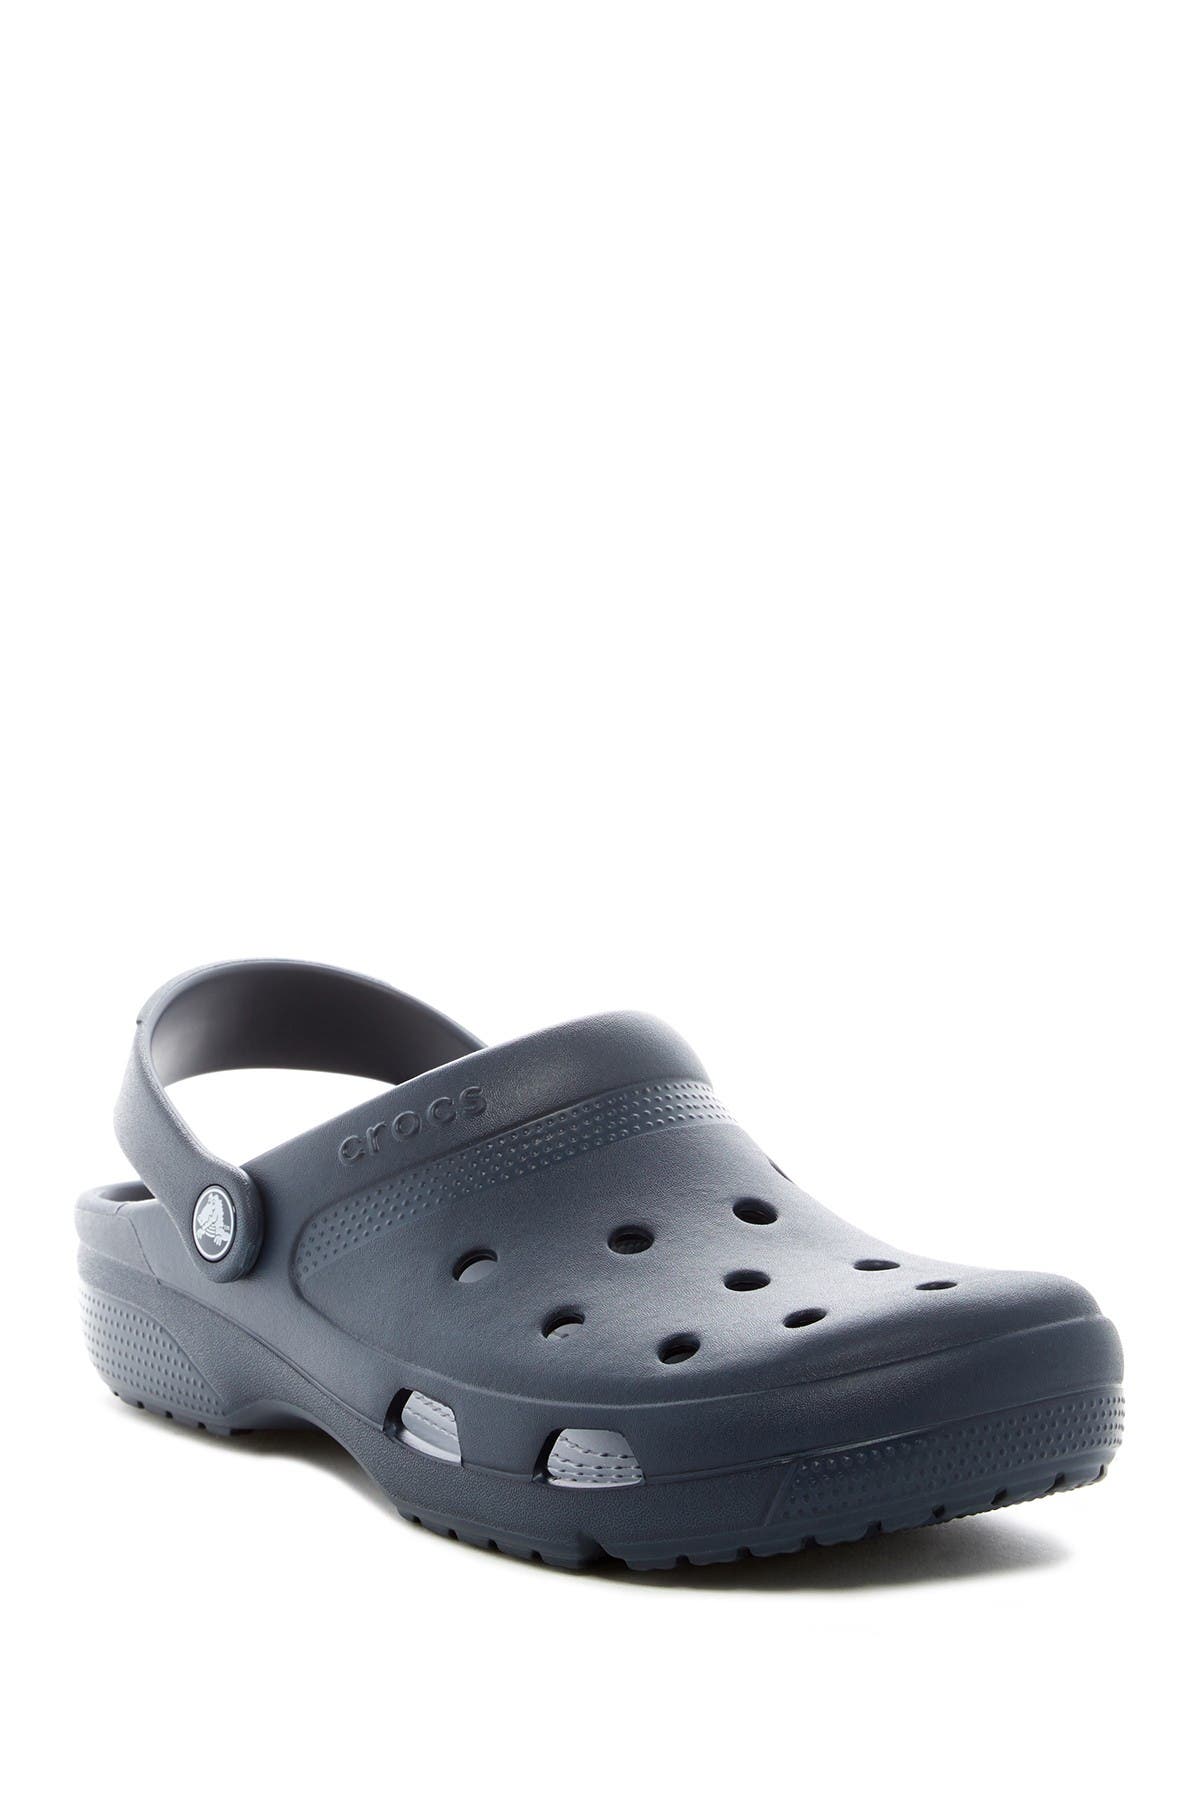 shoes comparable to crocs